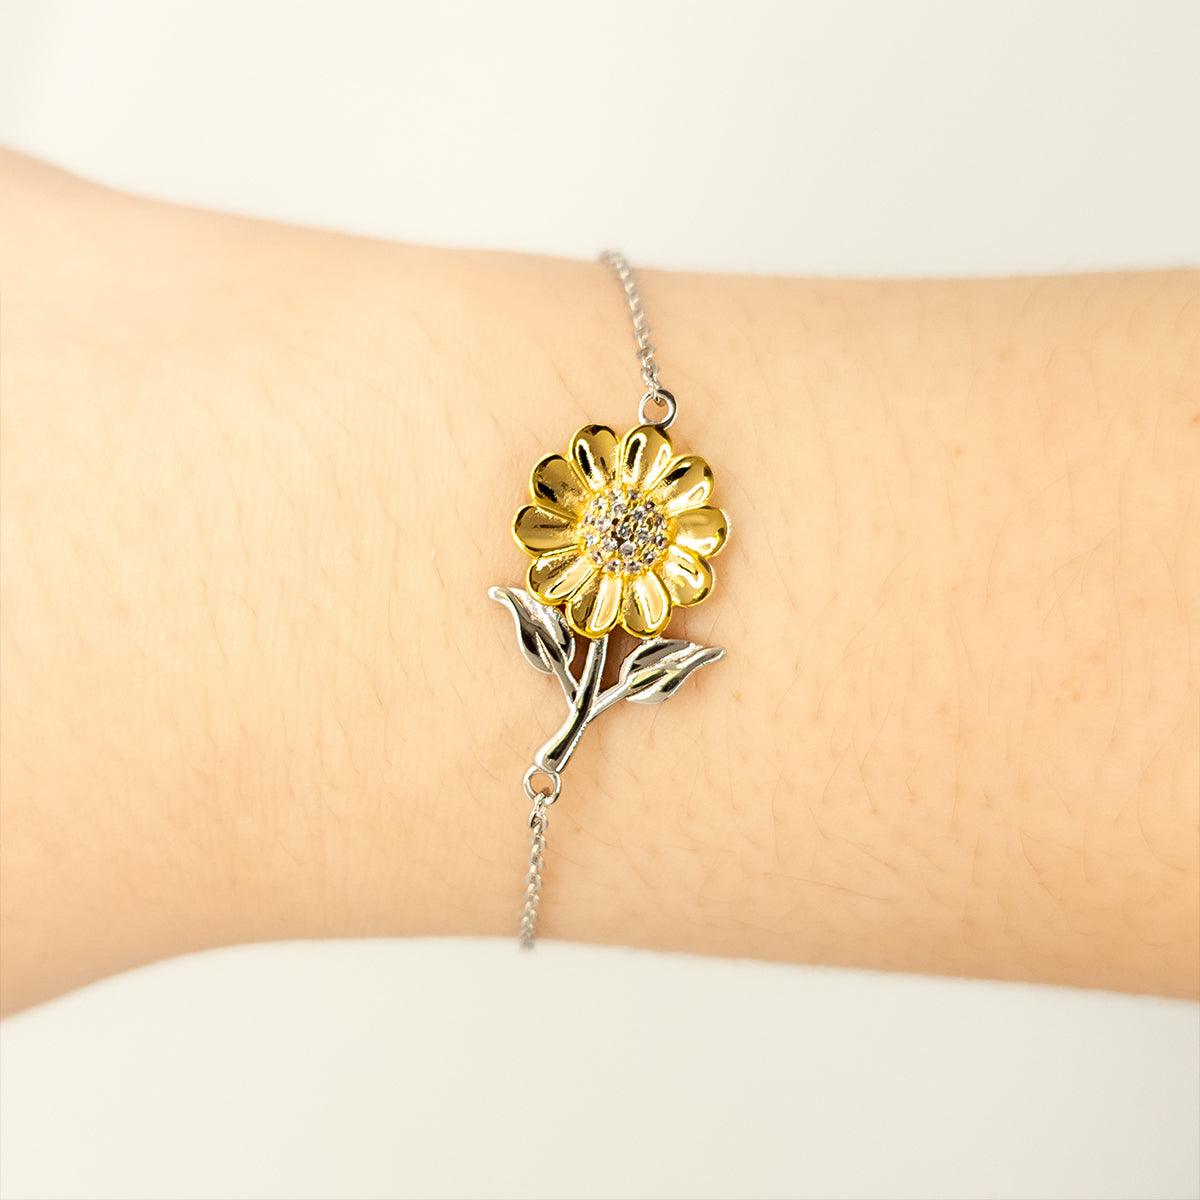 Mississippi is my home Gifts, Lovely Mississippi Birthday Christmas Sunflower Bracelet For People from Mississippi, Men, Women, Friends - Mallard Moon Gift Shop